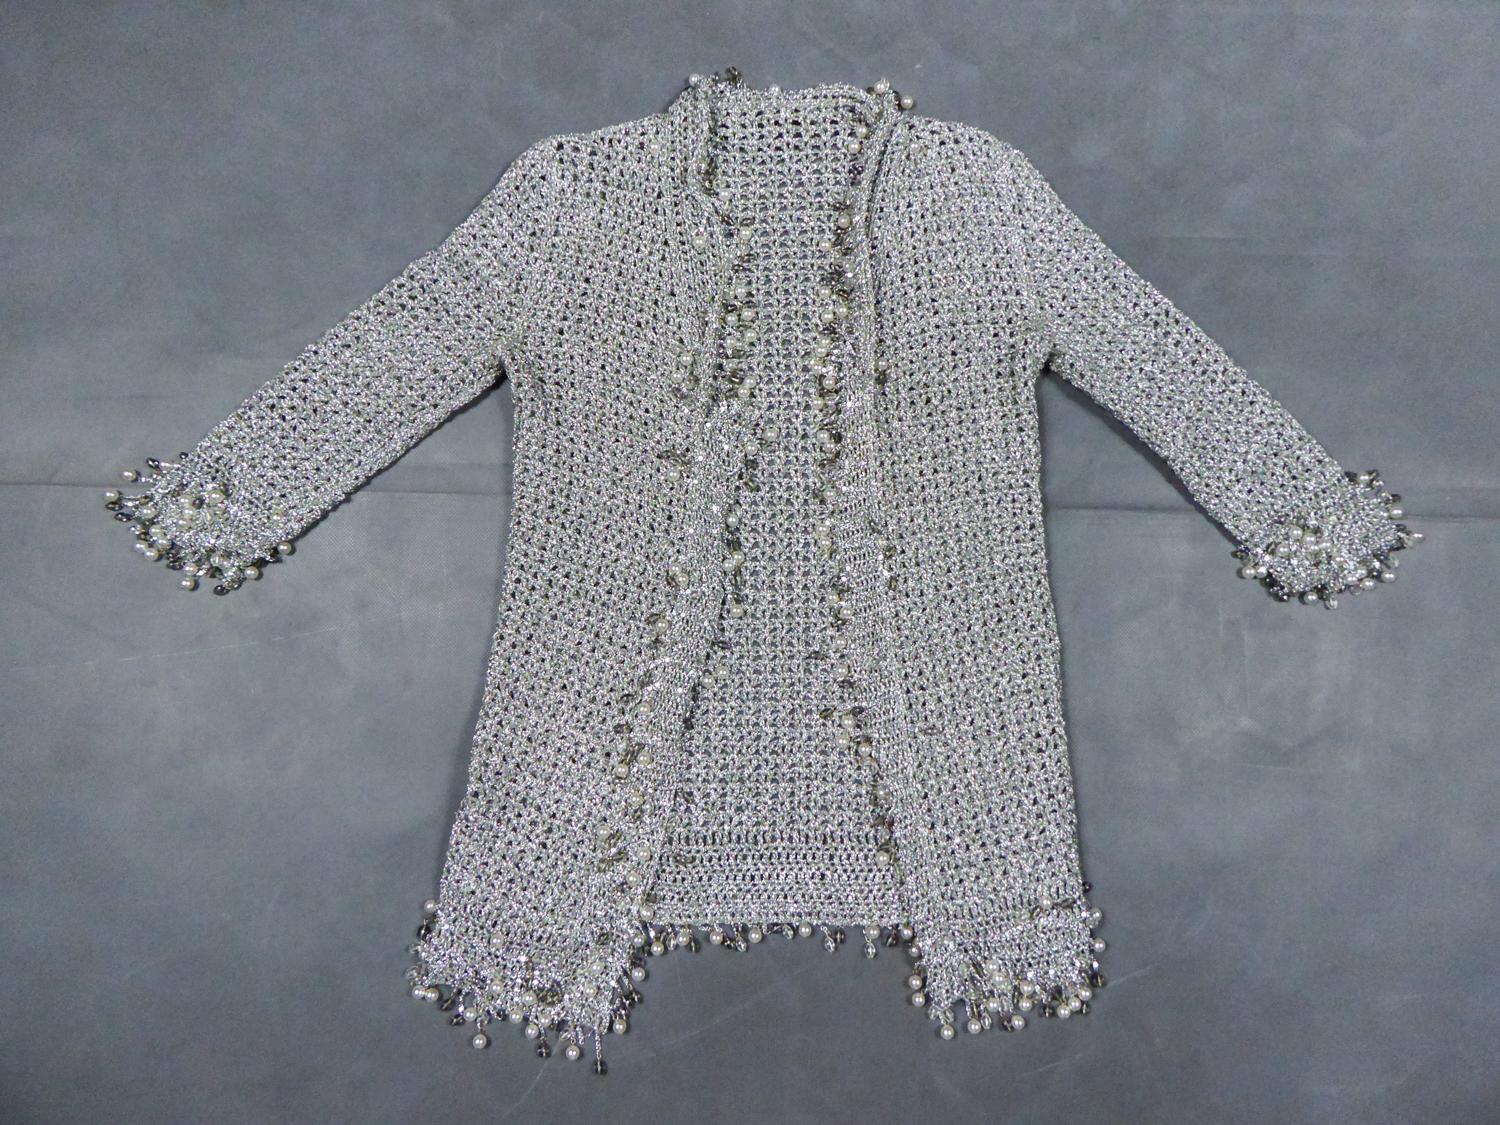 Circa 1970/1980
France

A Loris Azzaro (attributed to) evening jacket in silver lurex stitch dating from the 70s. Jacket with wide stitches, rim of the jacket including sleeves, collar, closure and bottom of the jacket in tassels of silver chains